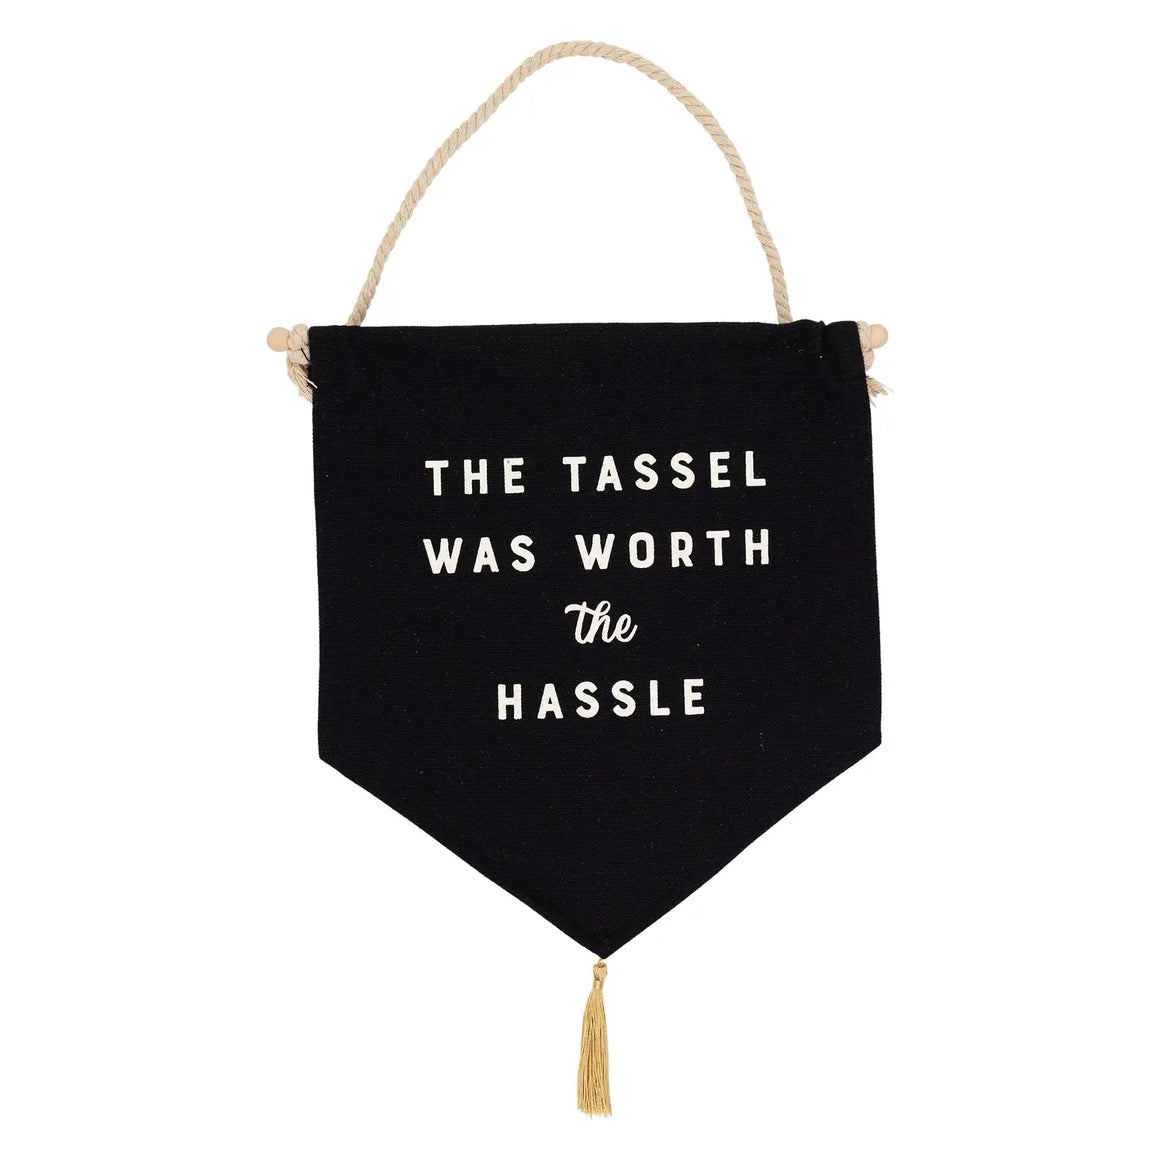 Worth the hassle canvas banner